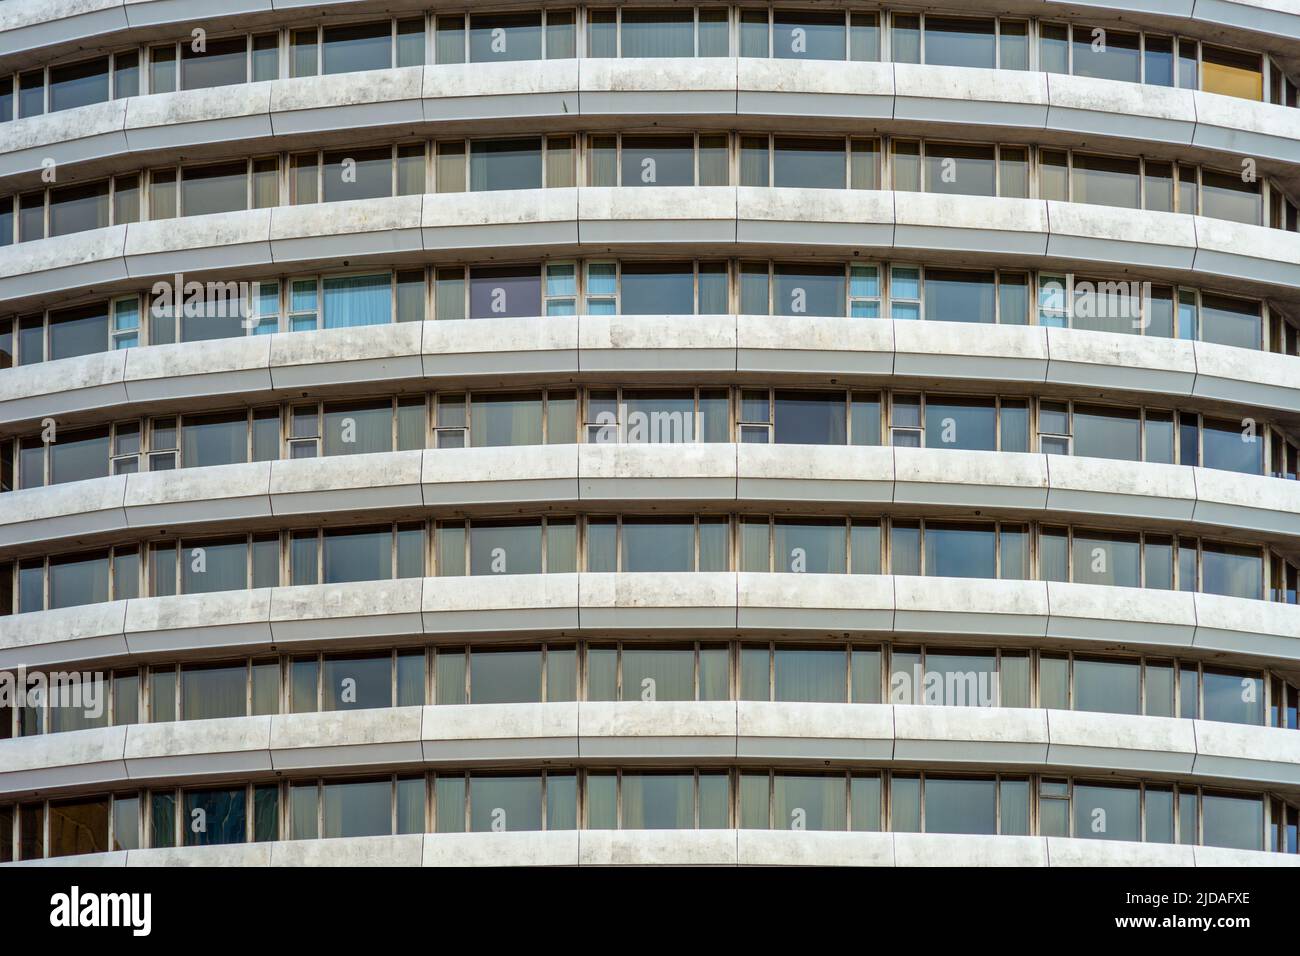 Windows of the Mercure Hotel Atlantic Tower, Liverpool, England, UK. Patterns, repetition Stock Photo